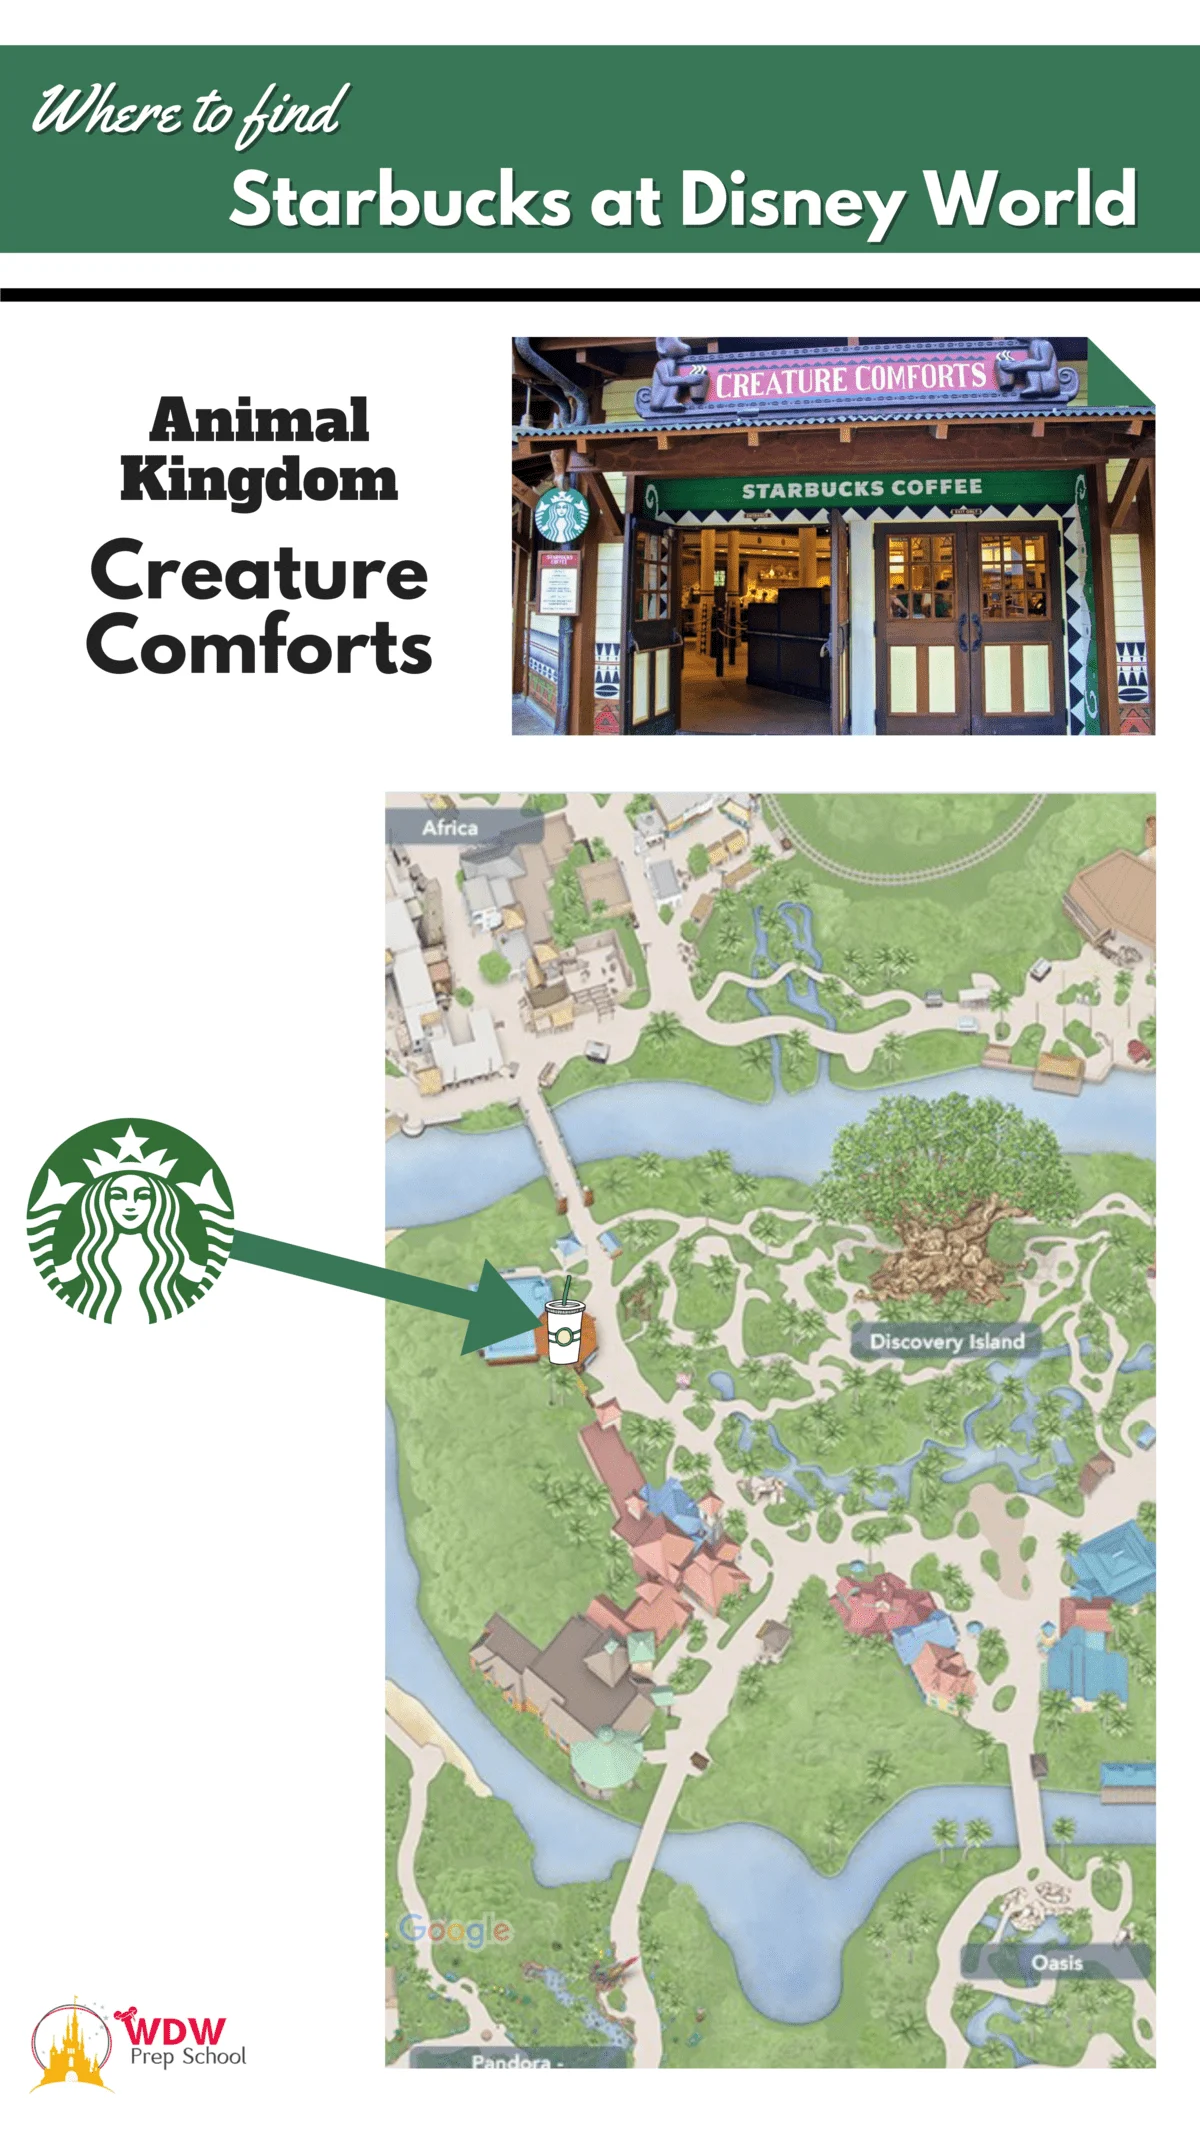 https://wdwprepschool.com/wp-content/uploads/starbucks-at-disney-world-here-everything-you-need-to-know-4.png.webp